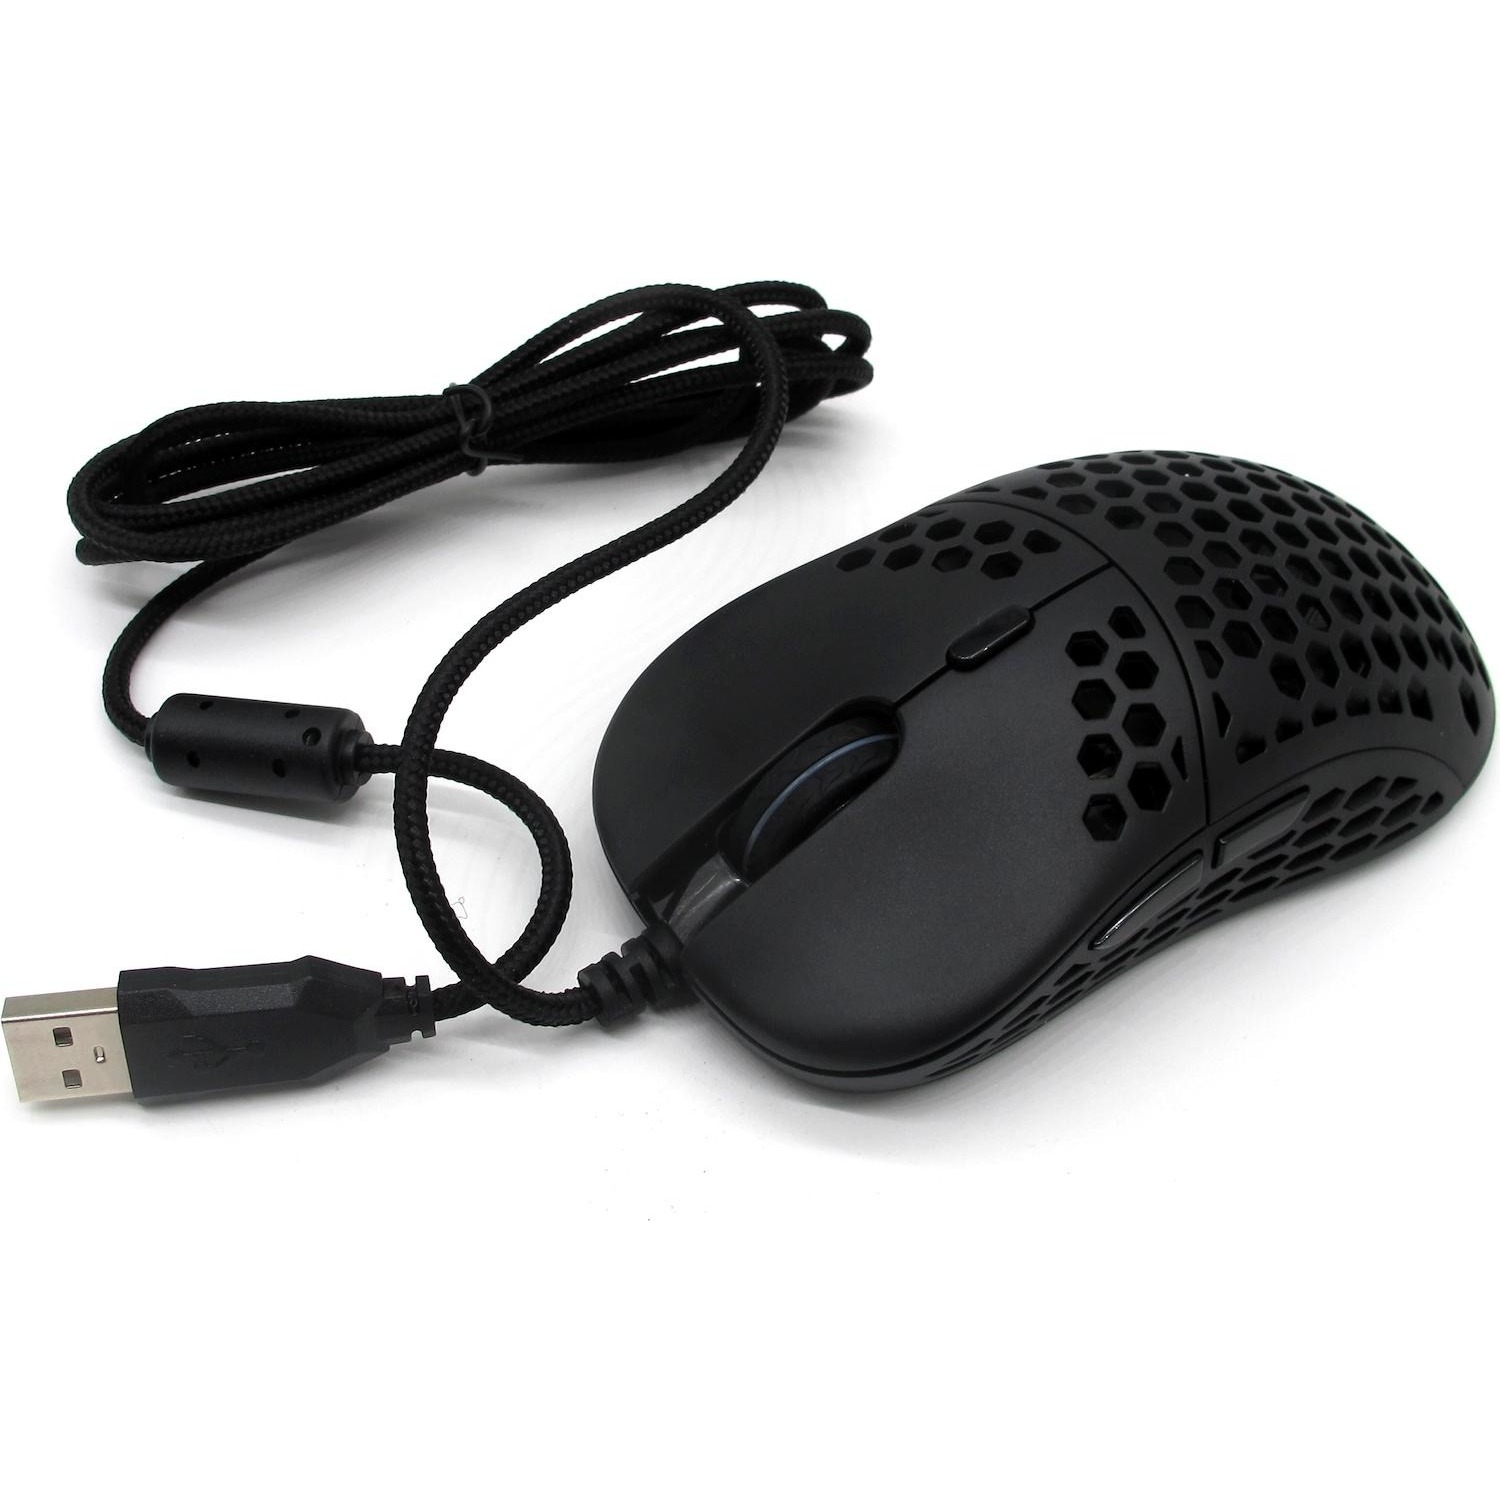 Immagine per Mouse gaming AAAmaze Ermes AMGT0014 da DIMOStore